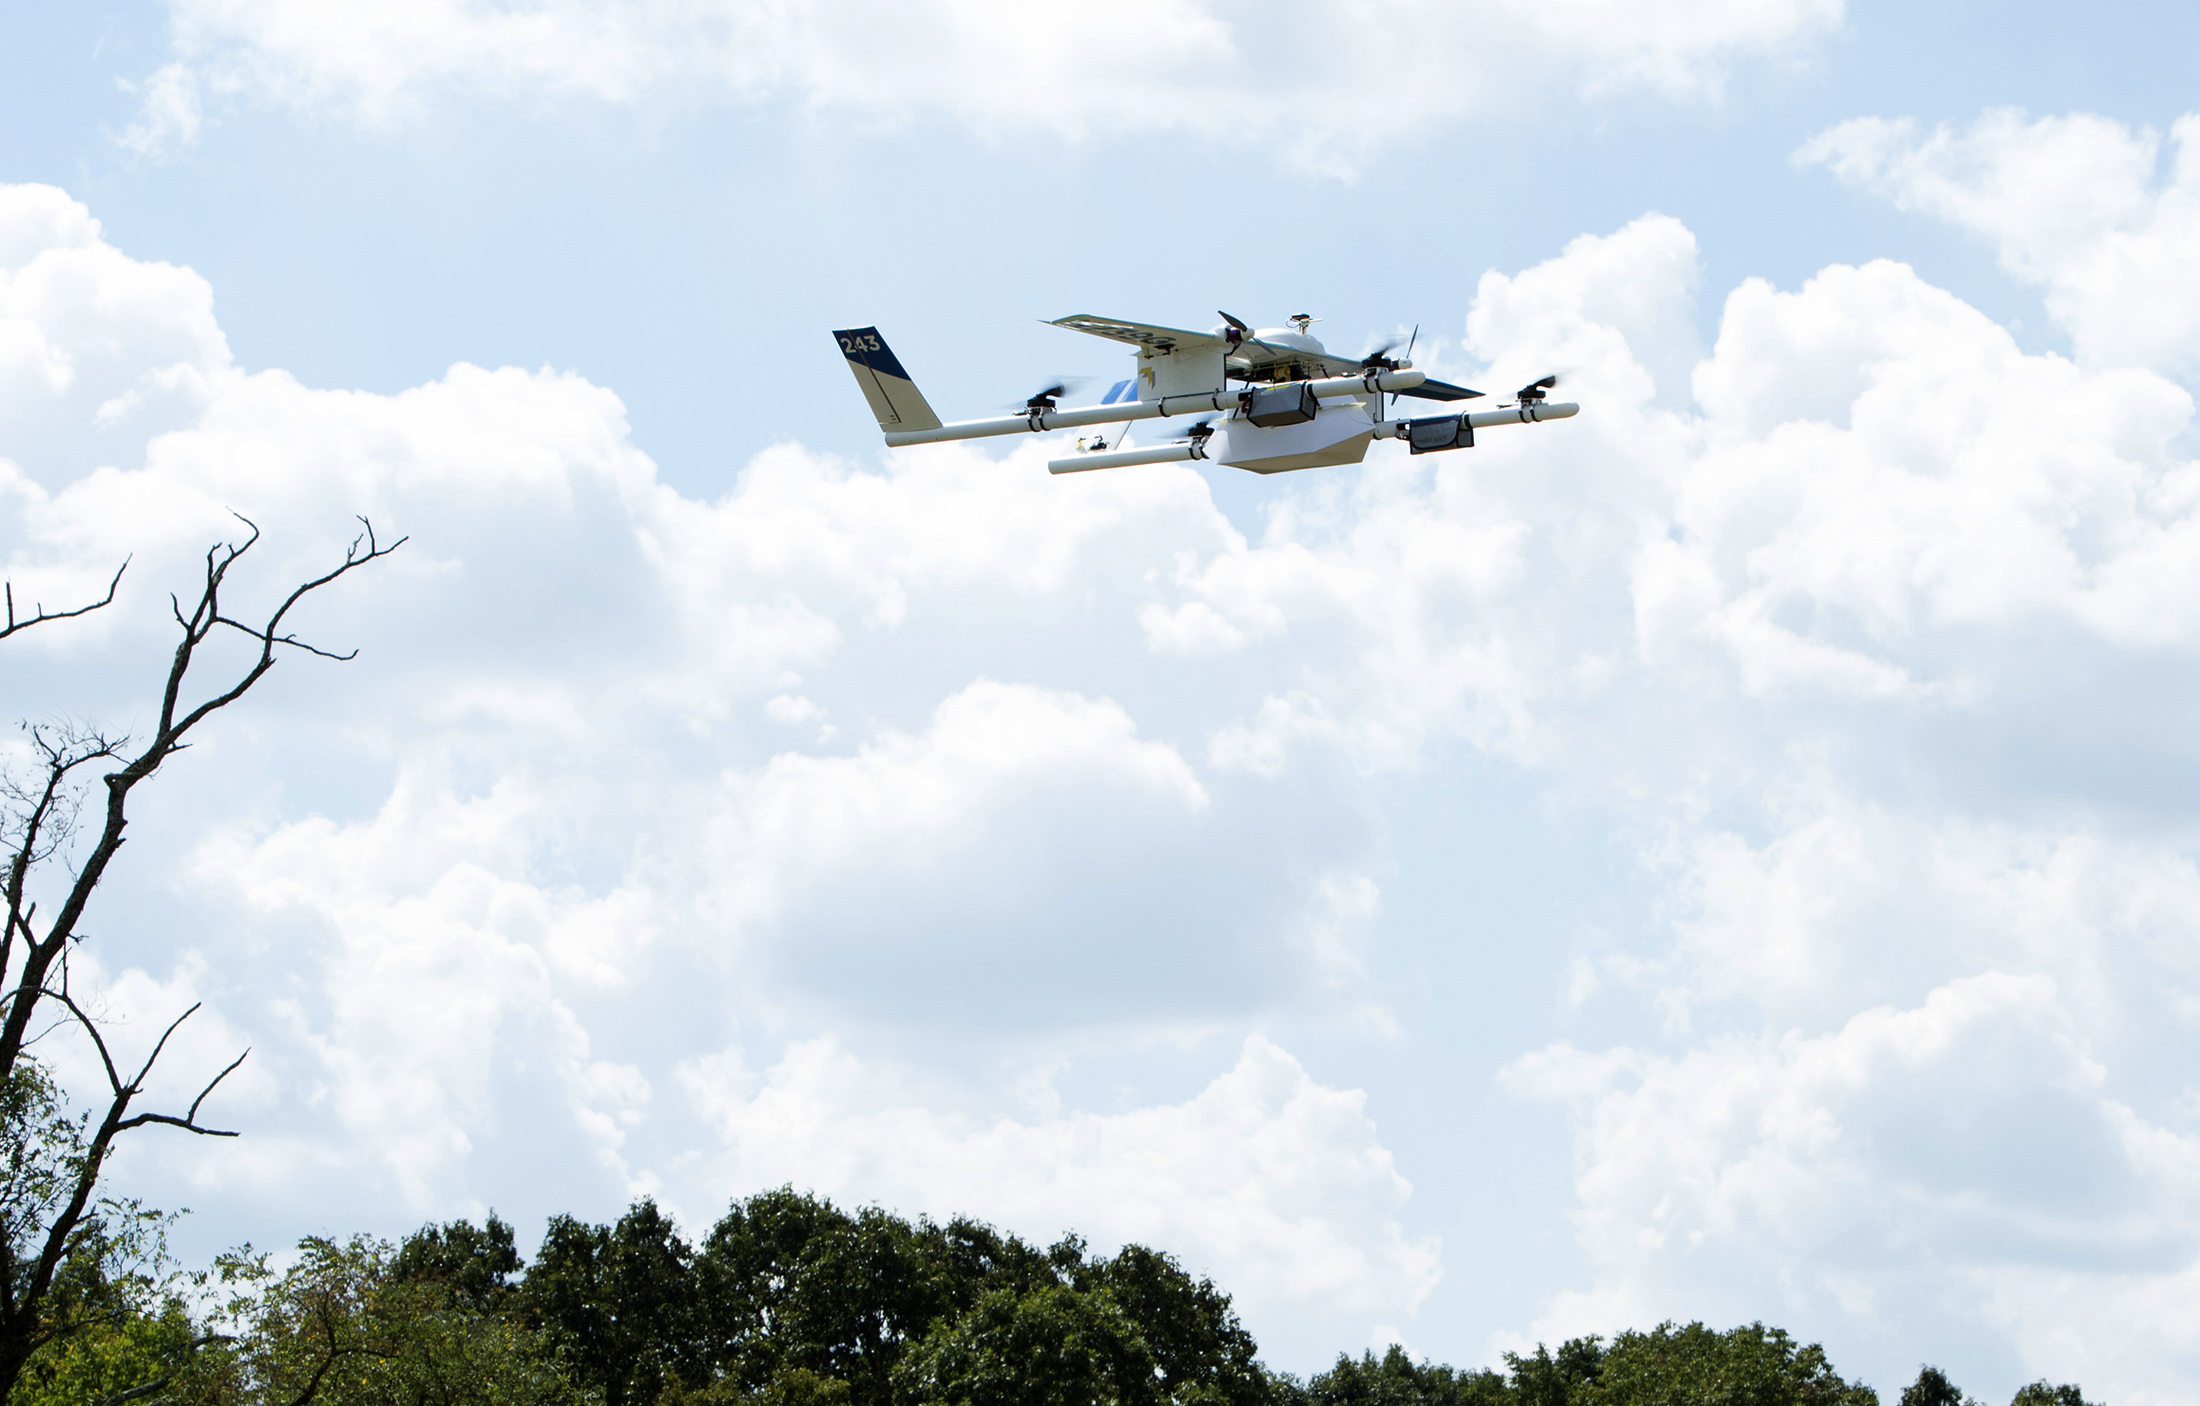 Google Drone delivers Chipotle at Virginia Tech